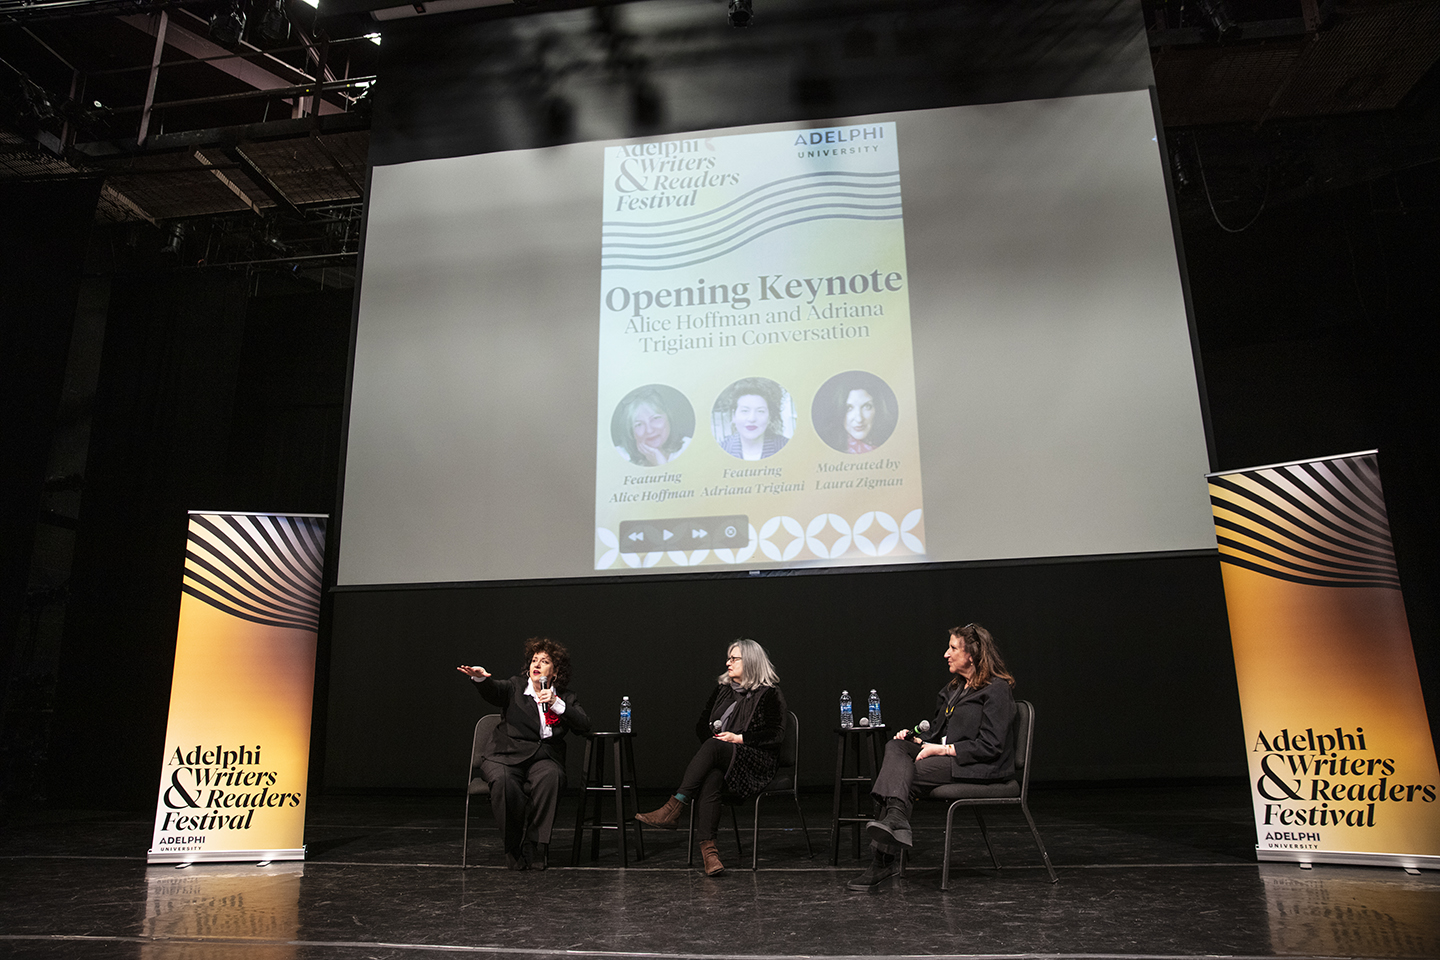 Authors and moderator seated on stage. There are banners on each side of them that read “ӰƬ Writers & Readers Festival” and a screen above them that says “Opening Keynote: Alice Hoffman and Adriana Trigiani in Conversation.” The screen also has their photos, along with a photo of the moderator.